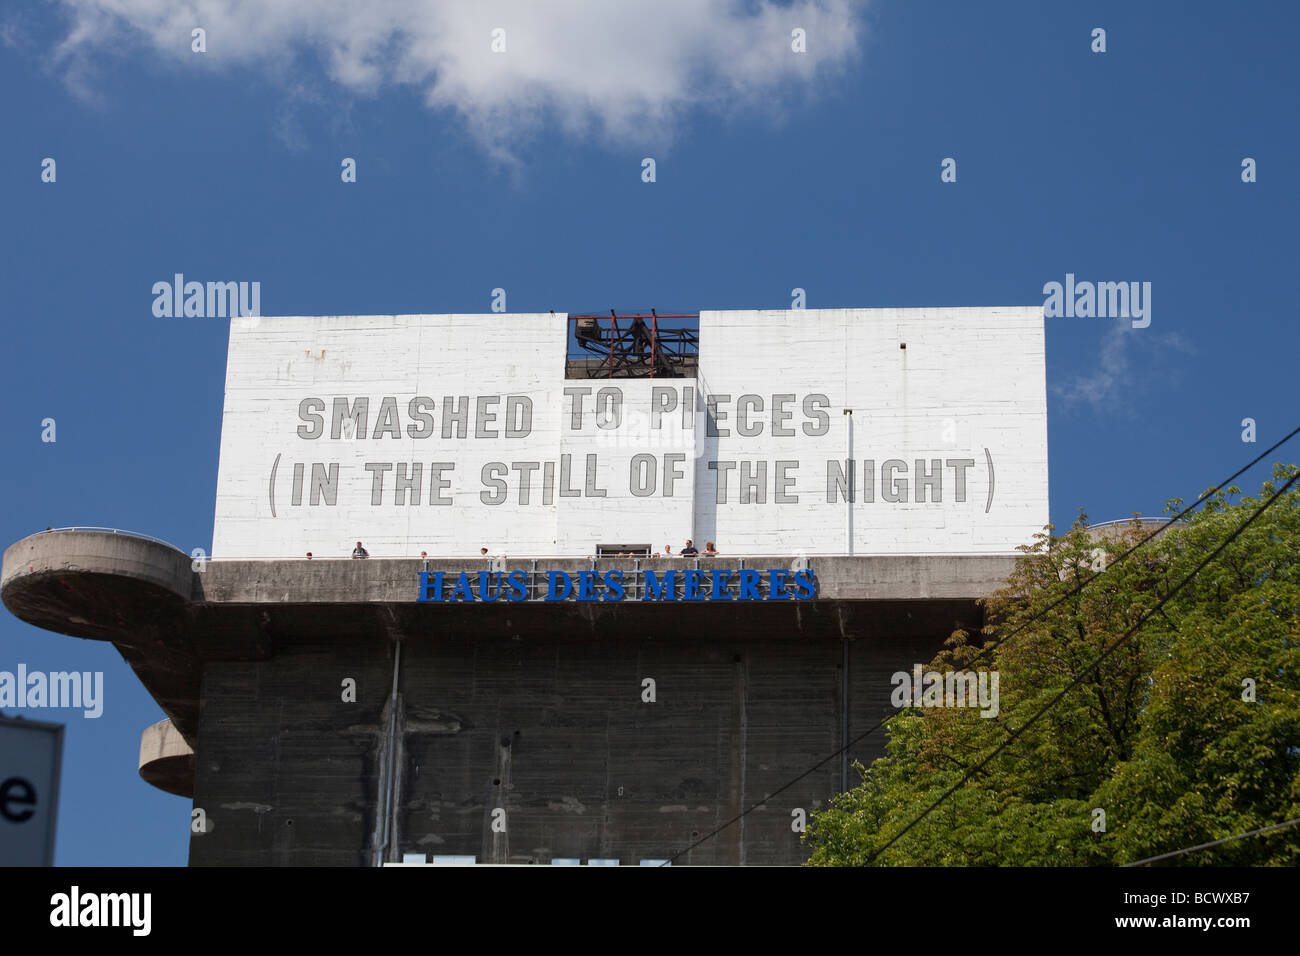 Smashed to pieces (in the still of the night); artwork by Lawrence Weiner on Vienna Aquarium Stock Photo